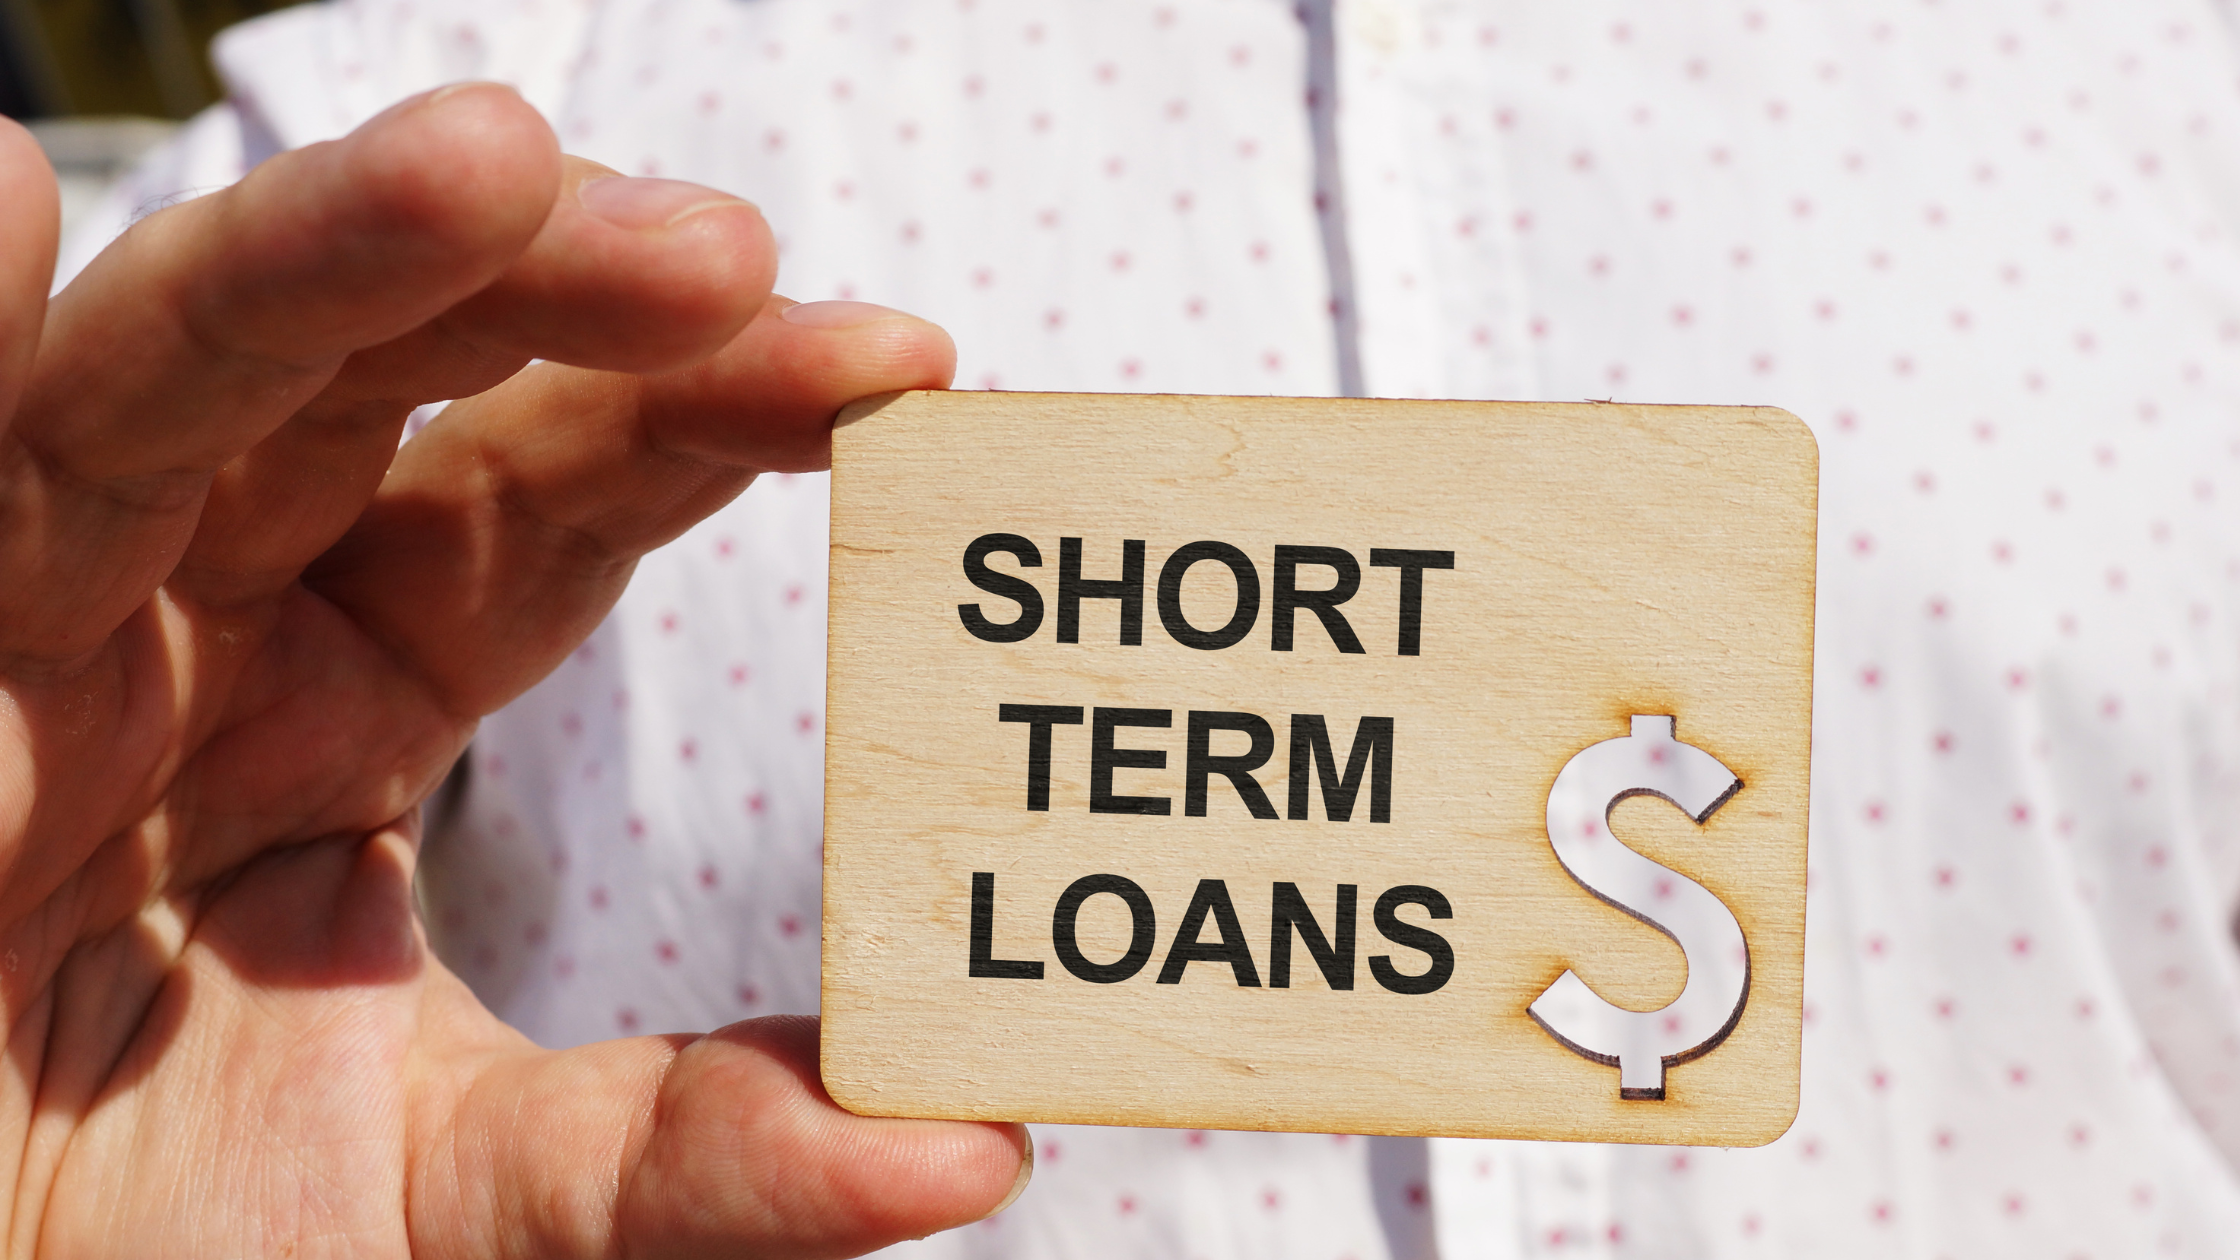 Requirements for a short-term business loan